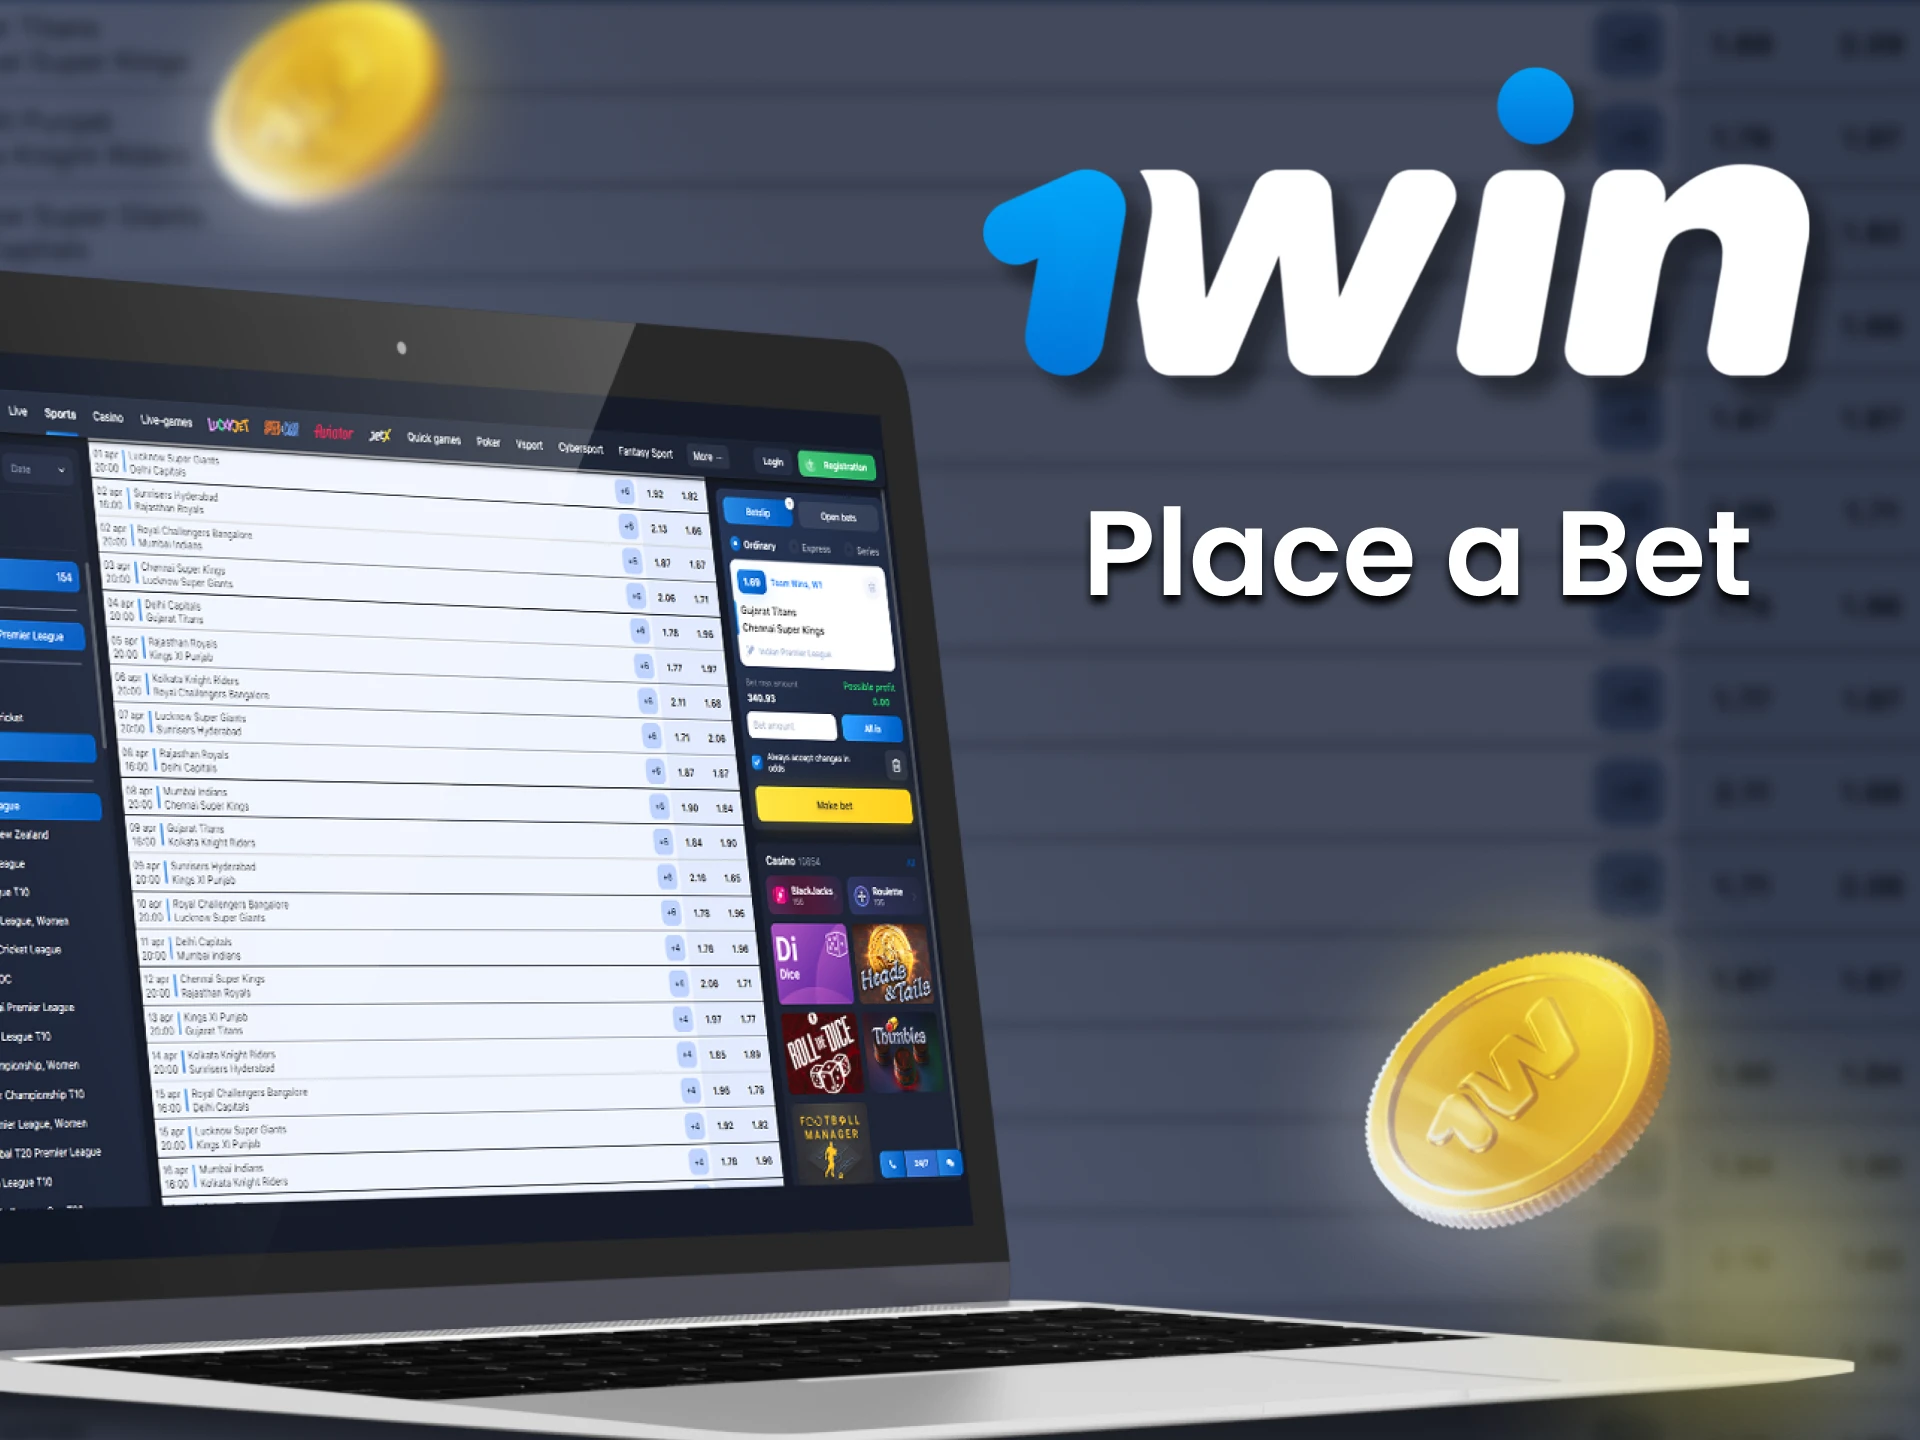 Log in to 1win and choose an event you want to place a bet on.